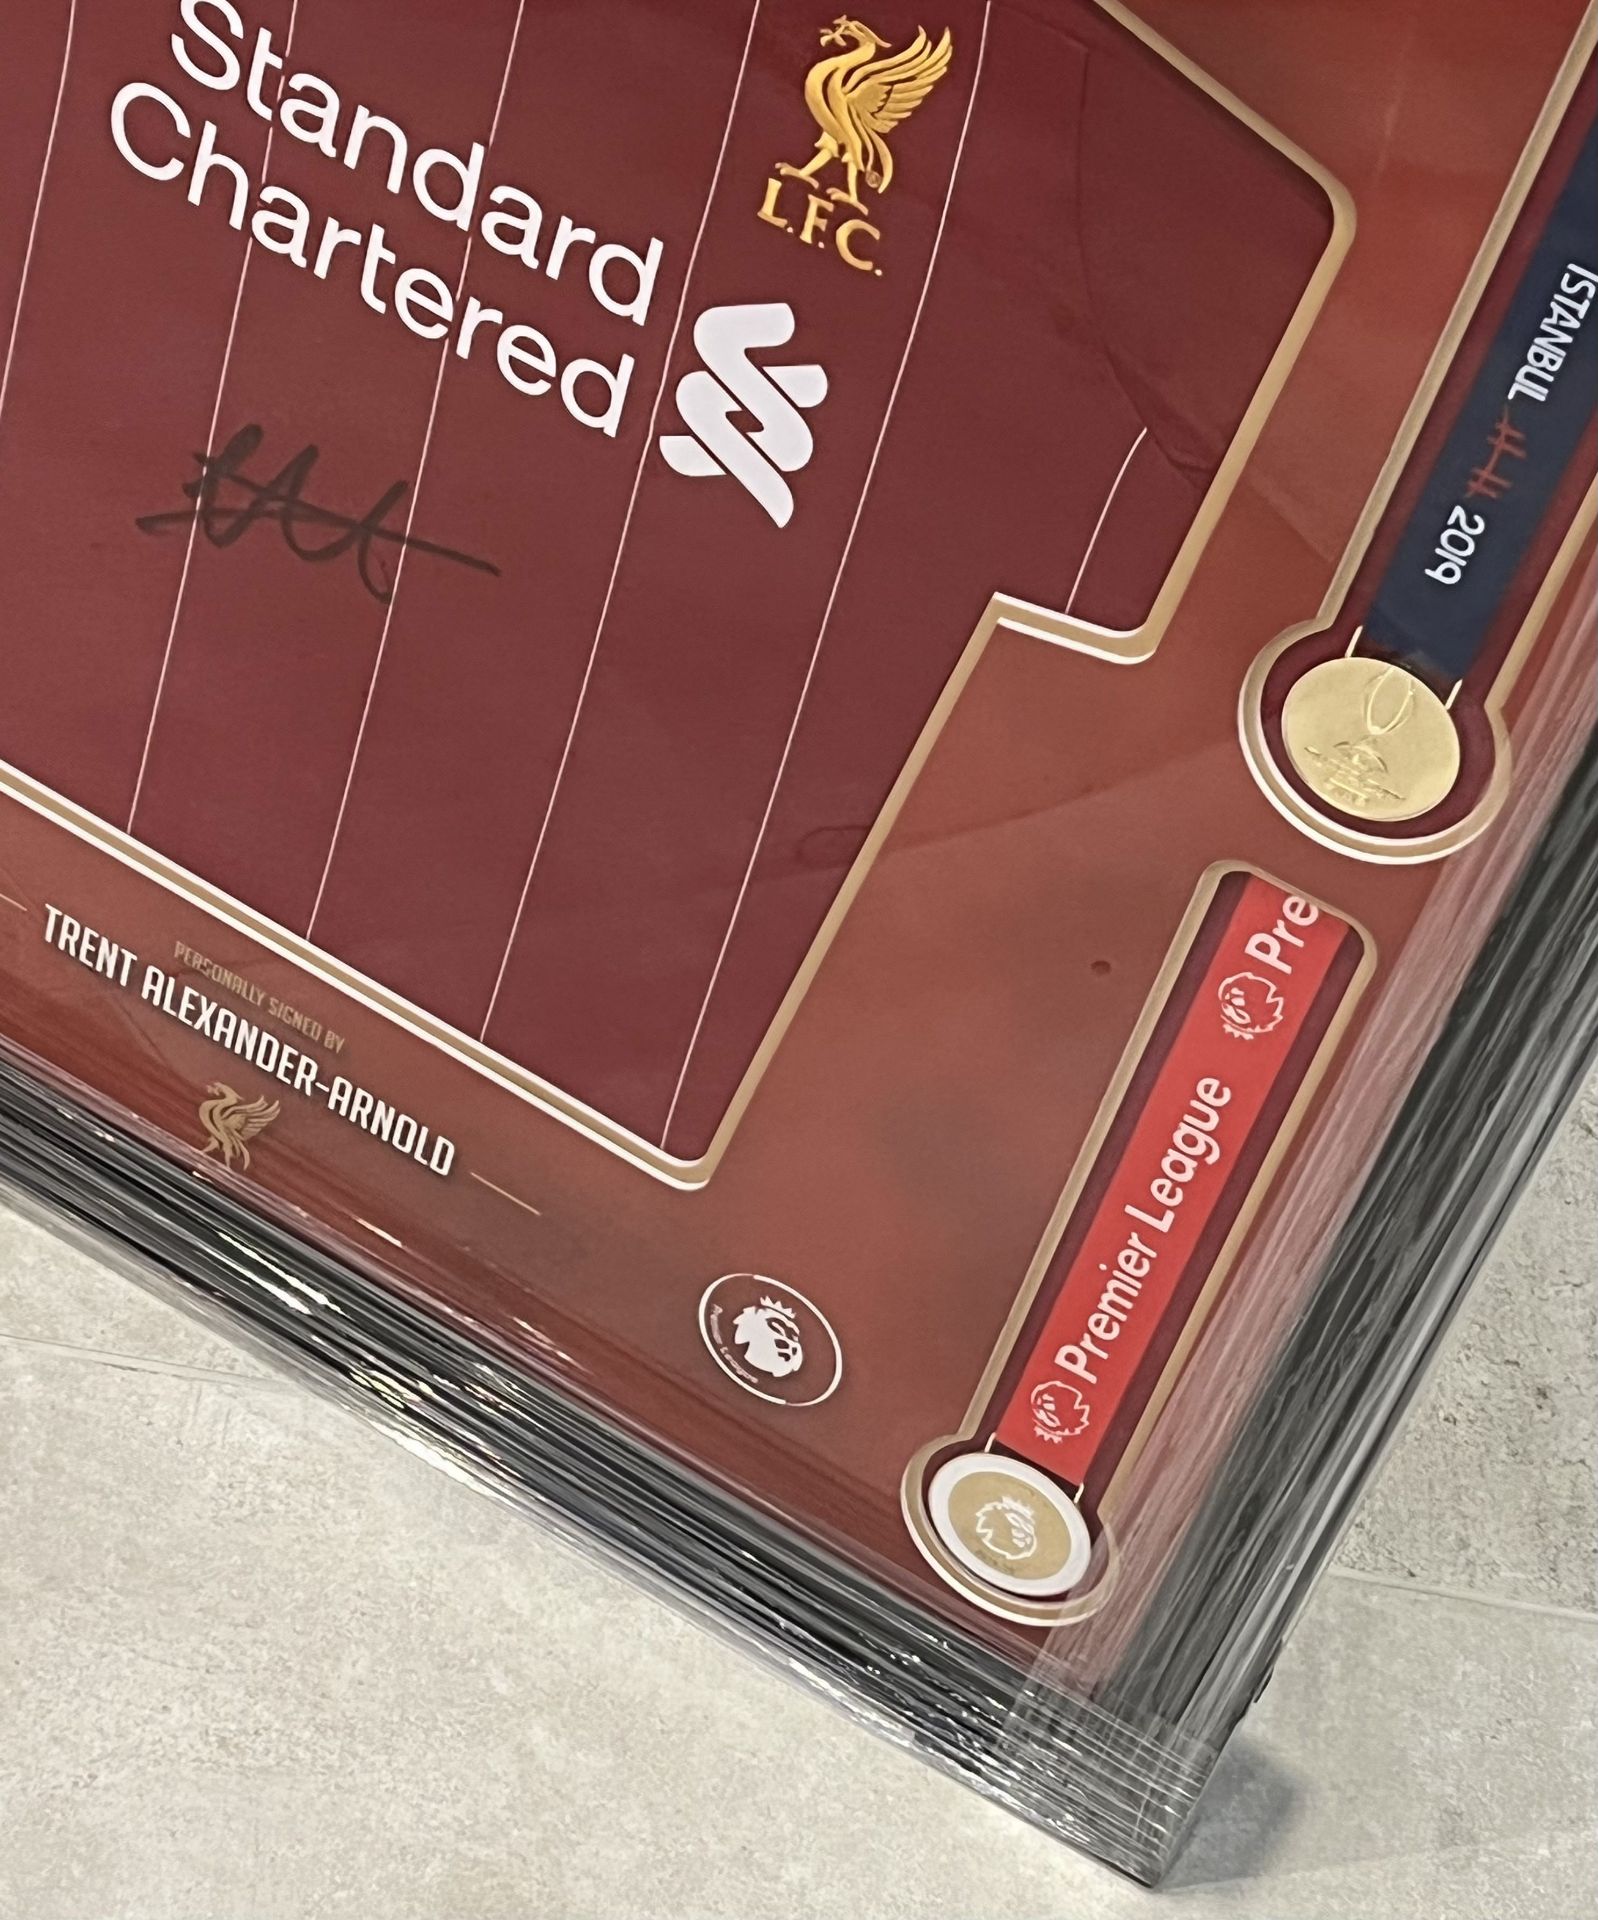 Trent Alexander-Arnold hand Signed Liverpool Champions framed football shirt with inset winners - Image 3 of 6